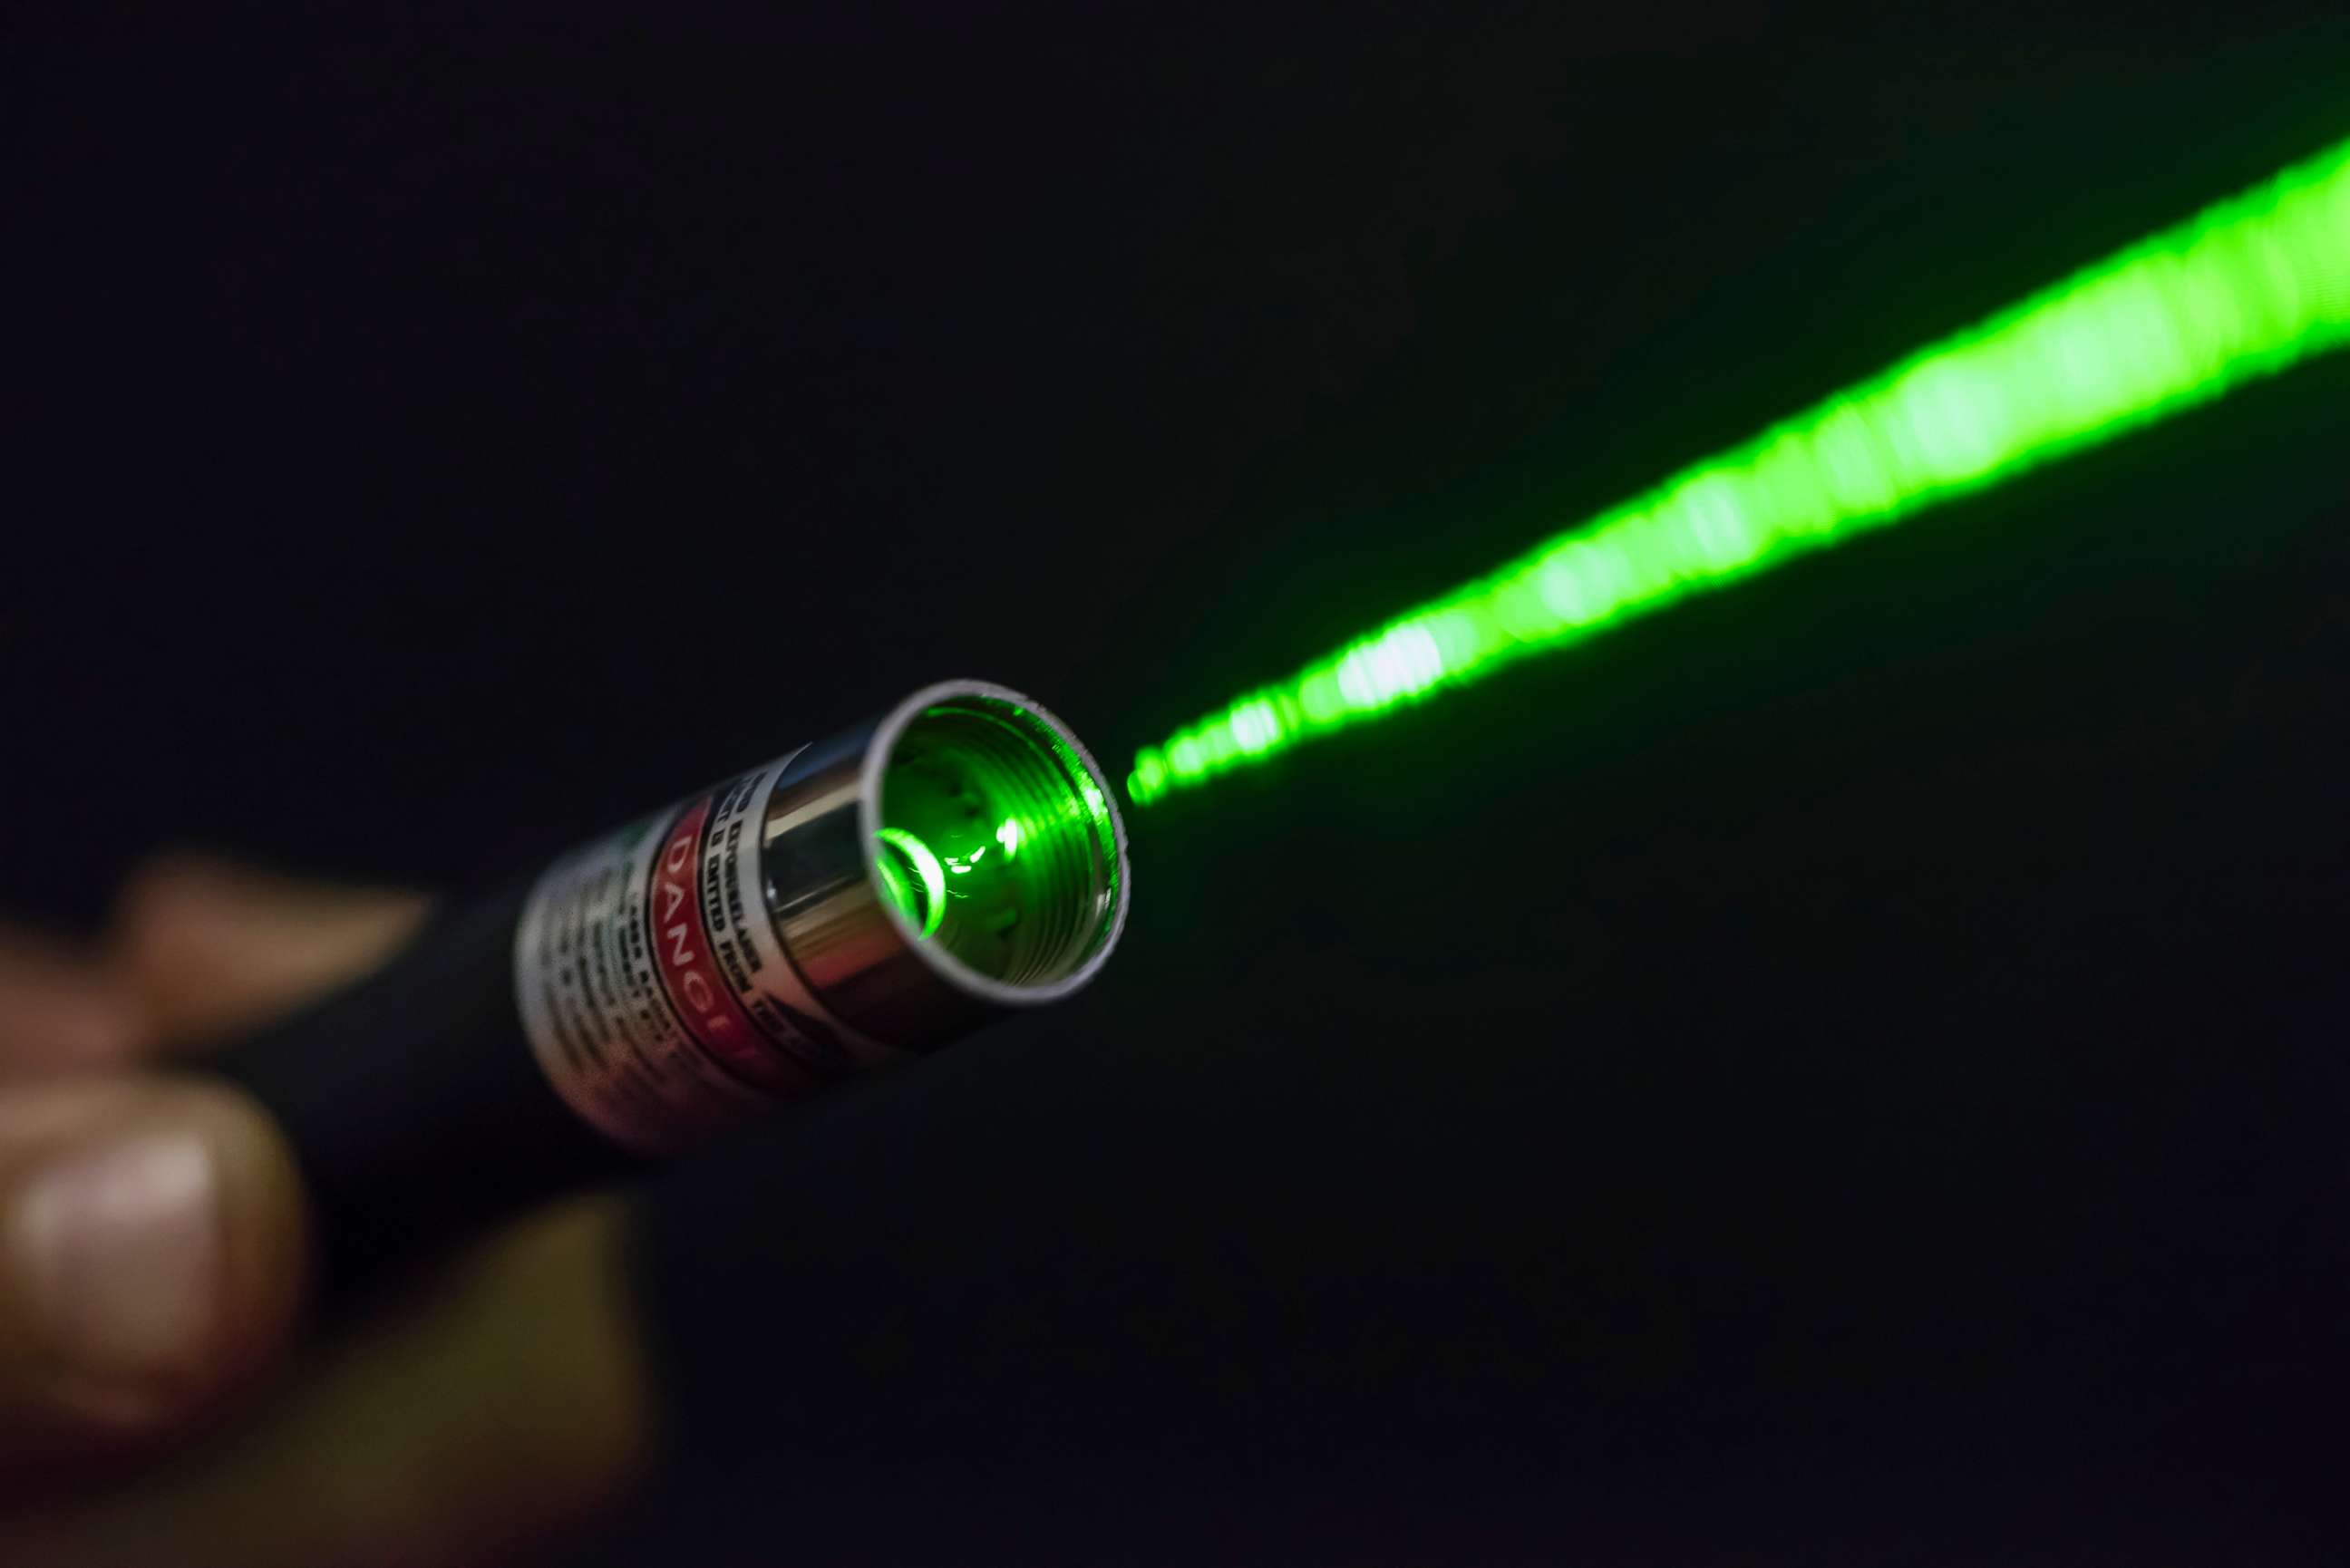 Laser strikes reach record numbers in 2021, FAA says - ABC News